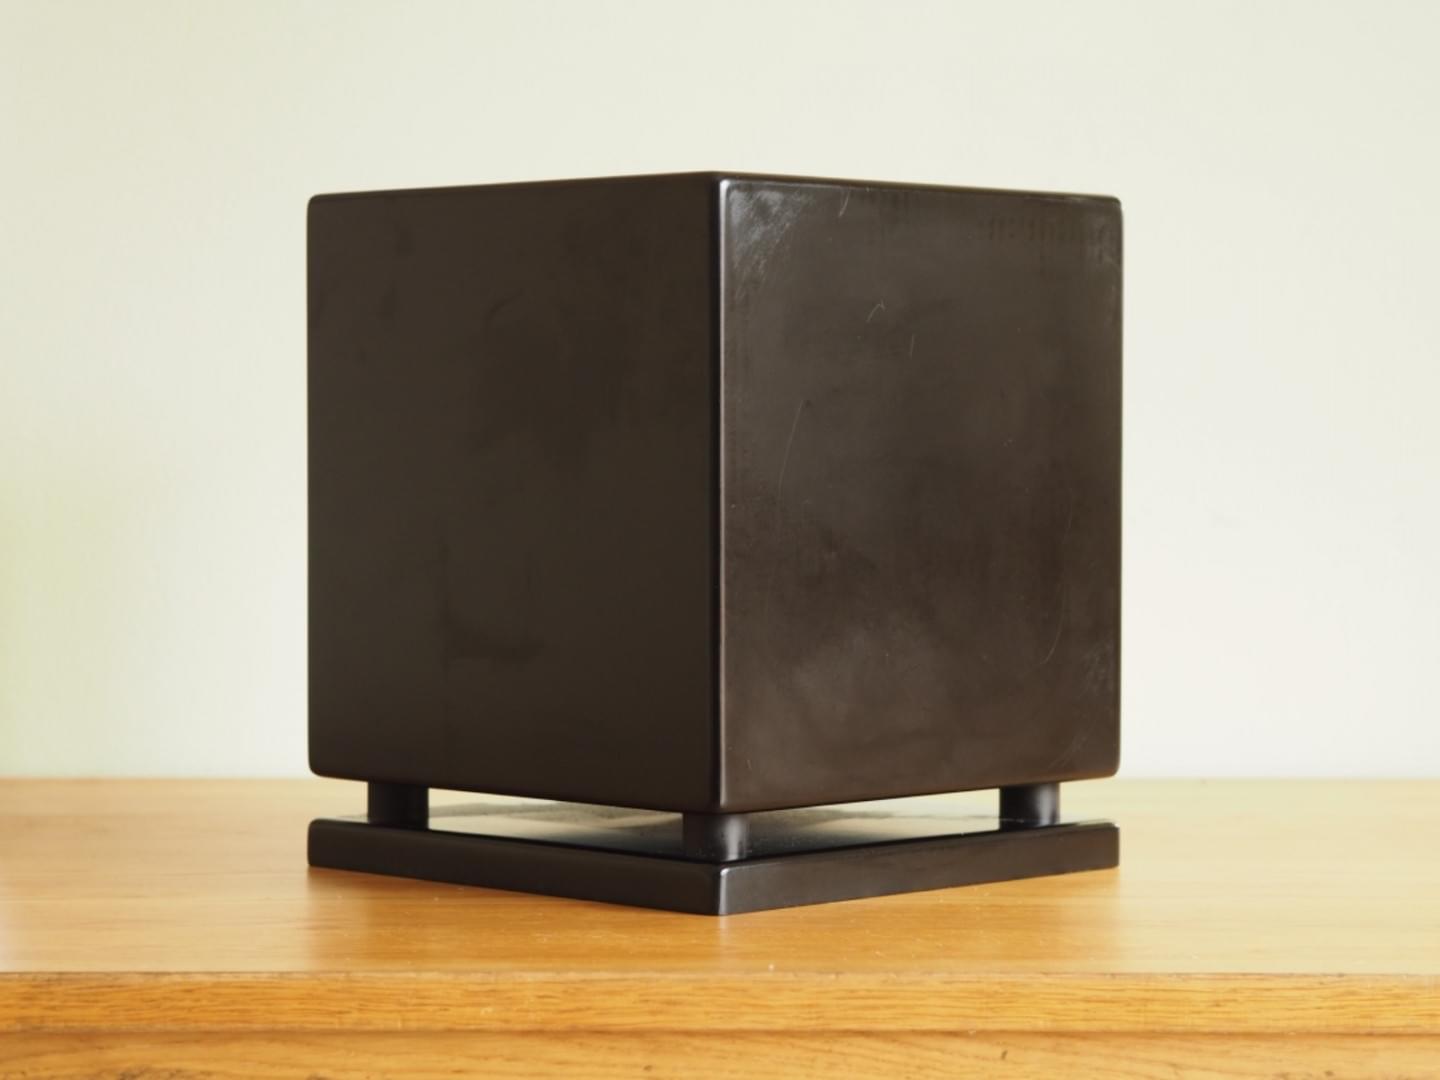 M.A.D. CSW-A | Active subwoofer from Archinterface